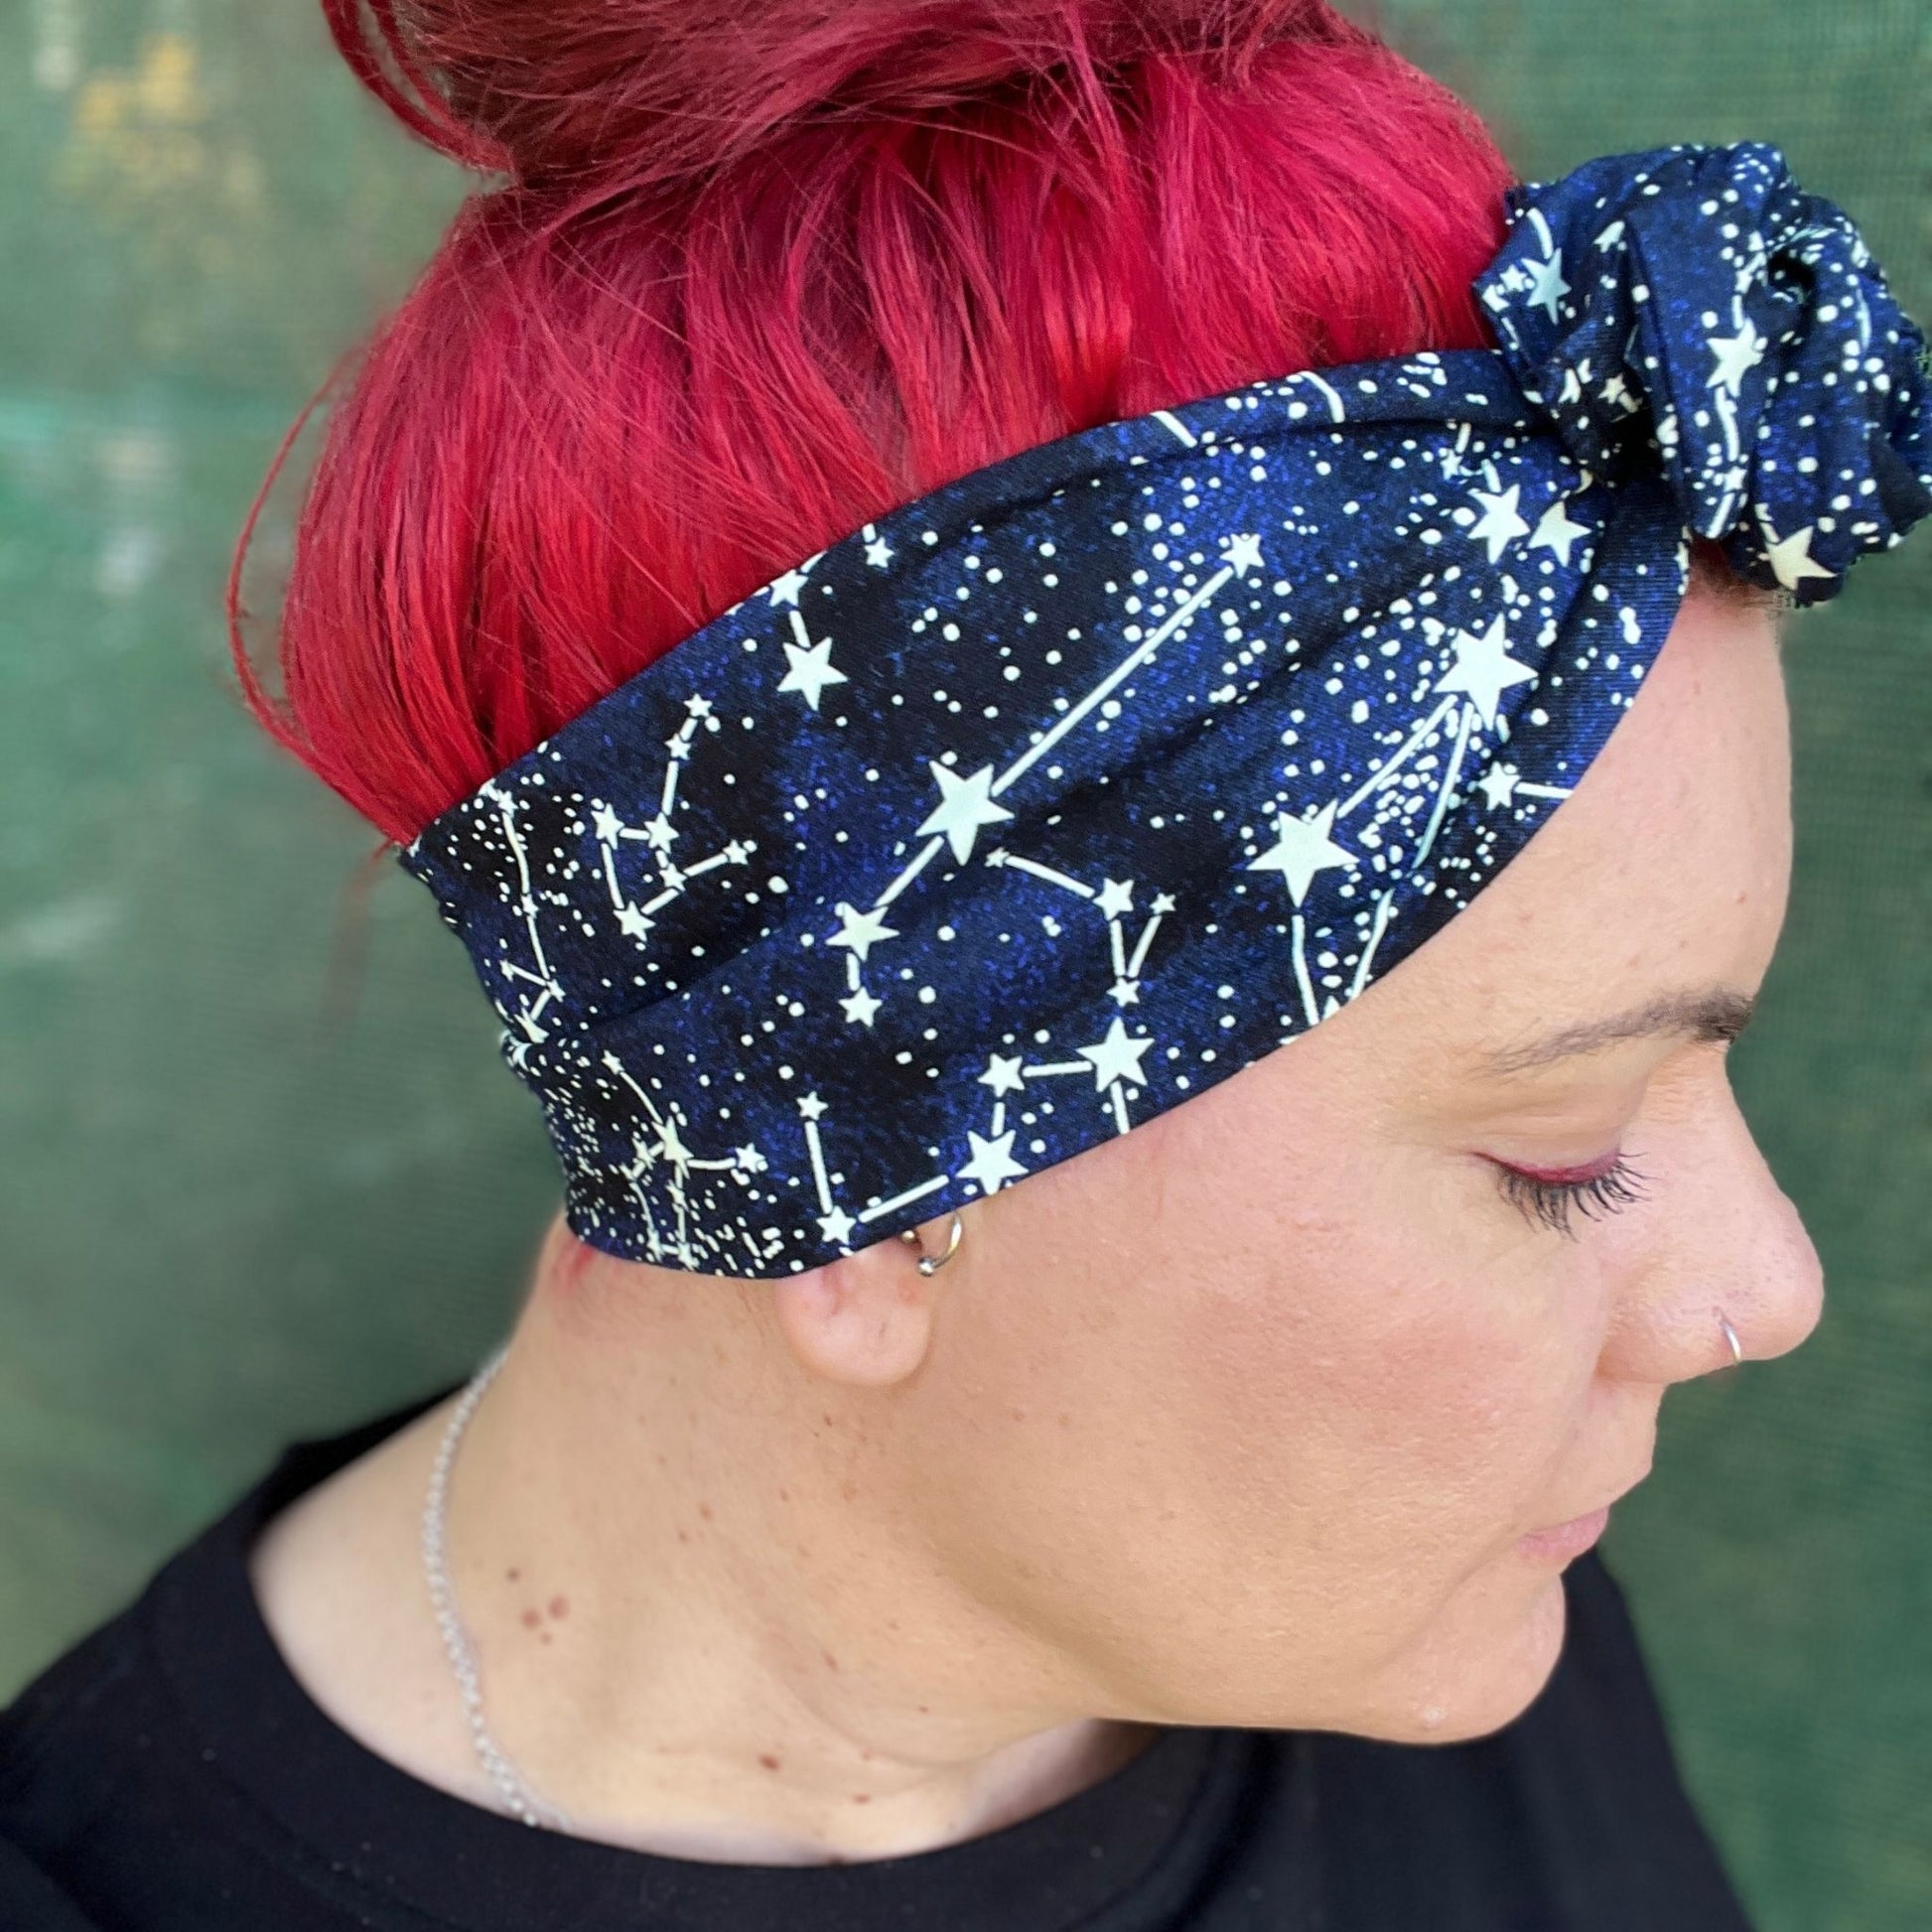 Glow in the dark stars wire headband Explore our collection of hair accessories for girls, featuring headbands and scrunchies, all made in Australia. Perfect for adding a touch of charm and style to any outfit, our locally crafted pieces ensure durability and fashion. Shop the latest in girl’s hair trends today!